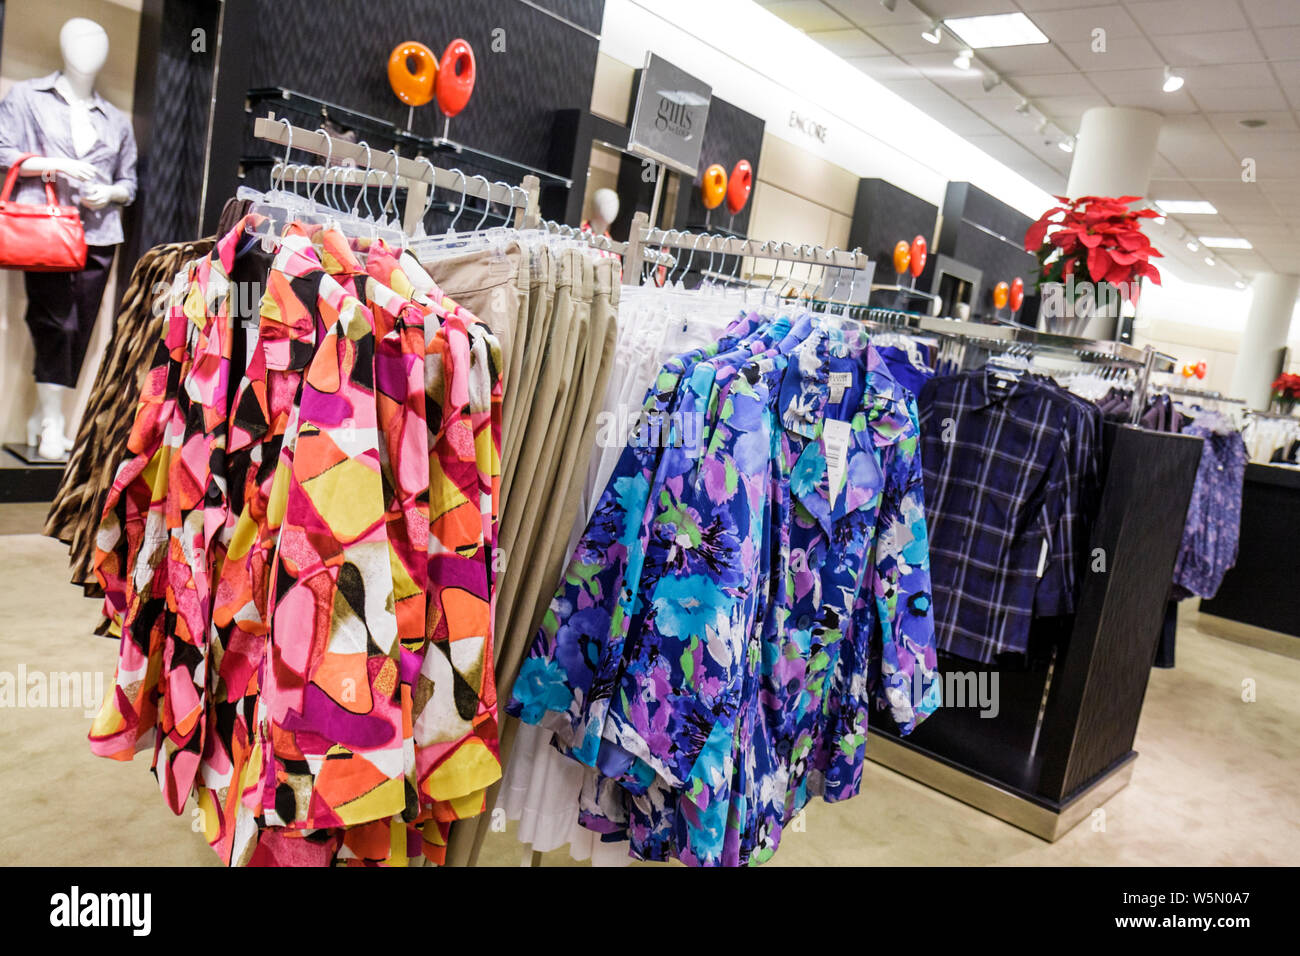 A shopping cart full of clothing items at a Nordstrom Rack Stock Photo -  Alamy